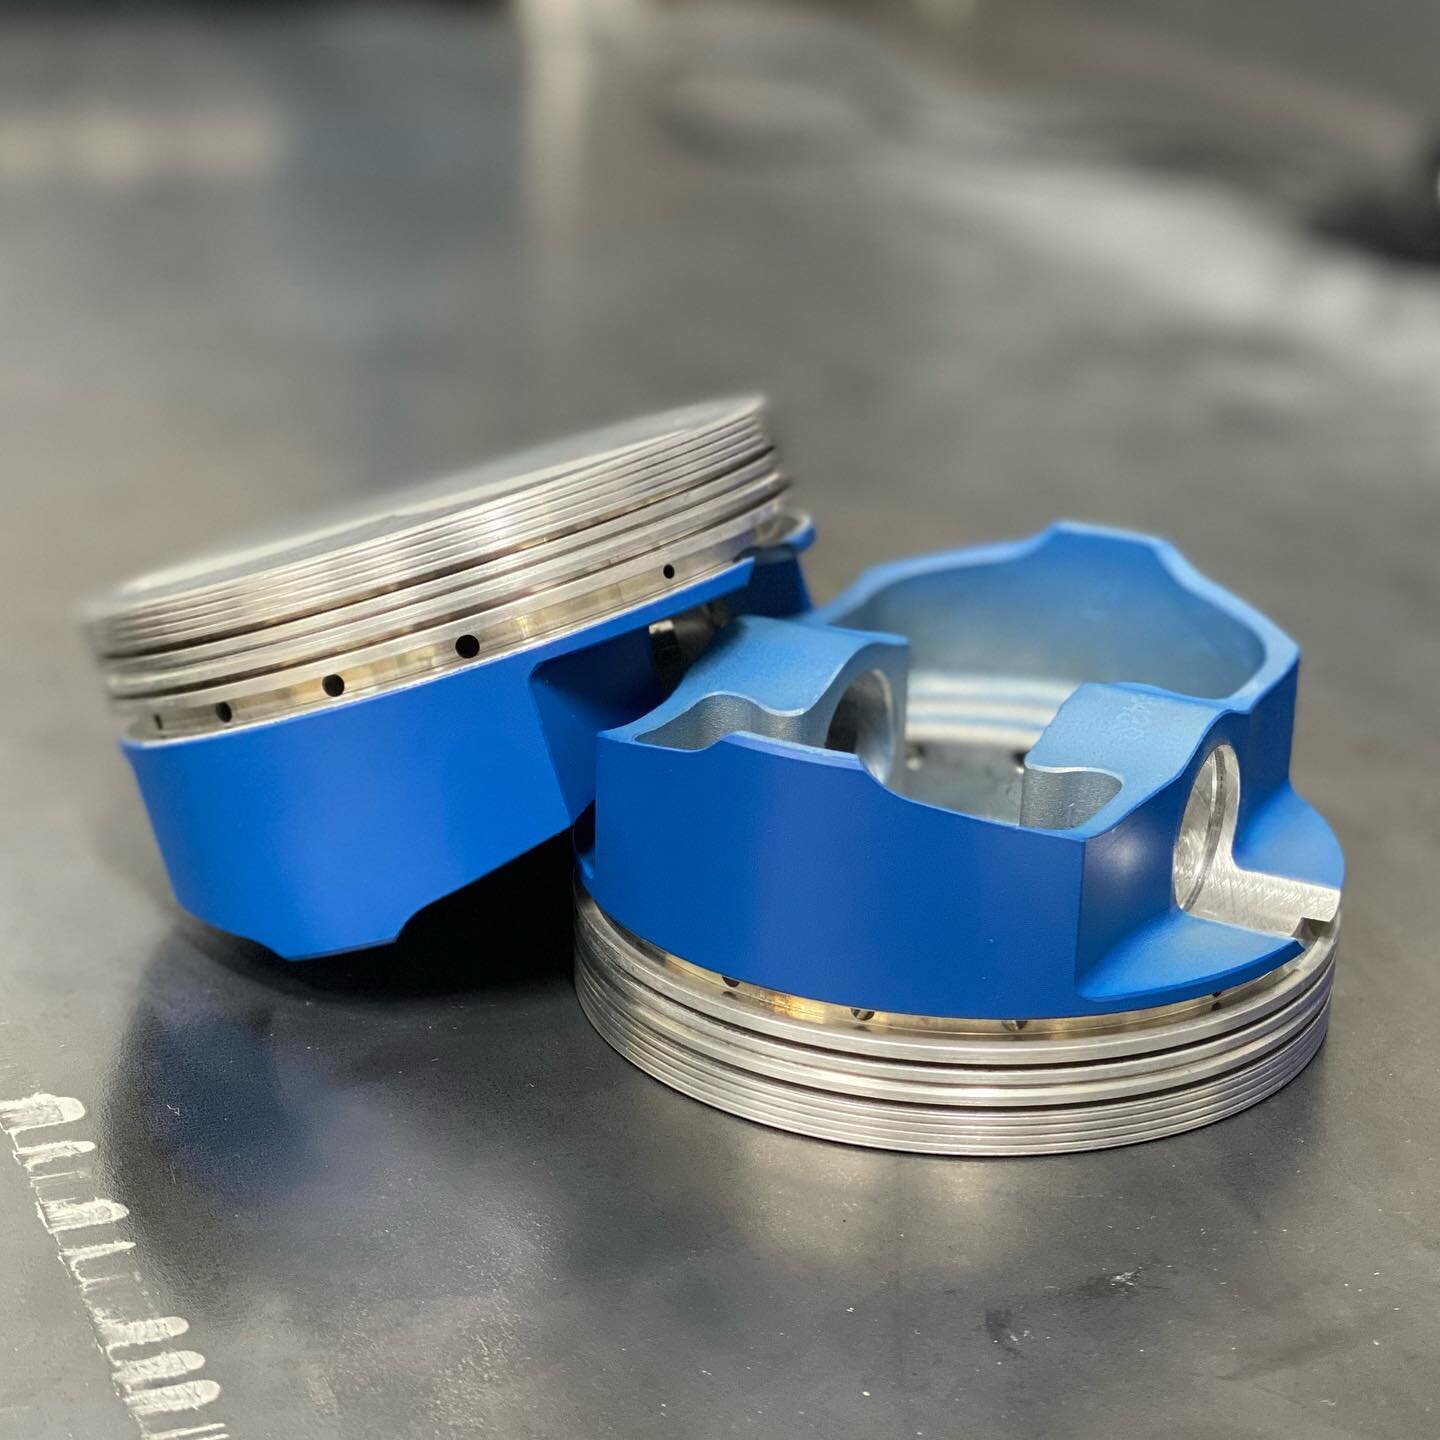 Fresh skirt coatings on these forged Ford small block pistons from High Performance Coatings NZ.💥 #ford #fordsmallblock #fomoco #fordperformance #hpc #hpcnz #enginebuild #rebuild  #hmraceengines #v8 #fordv8 #performance #precision #engineer #machini